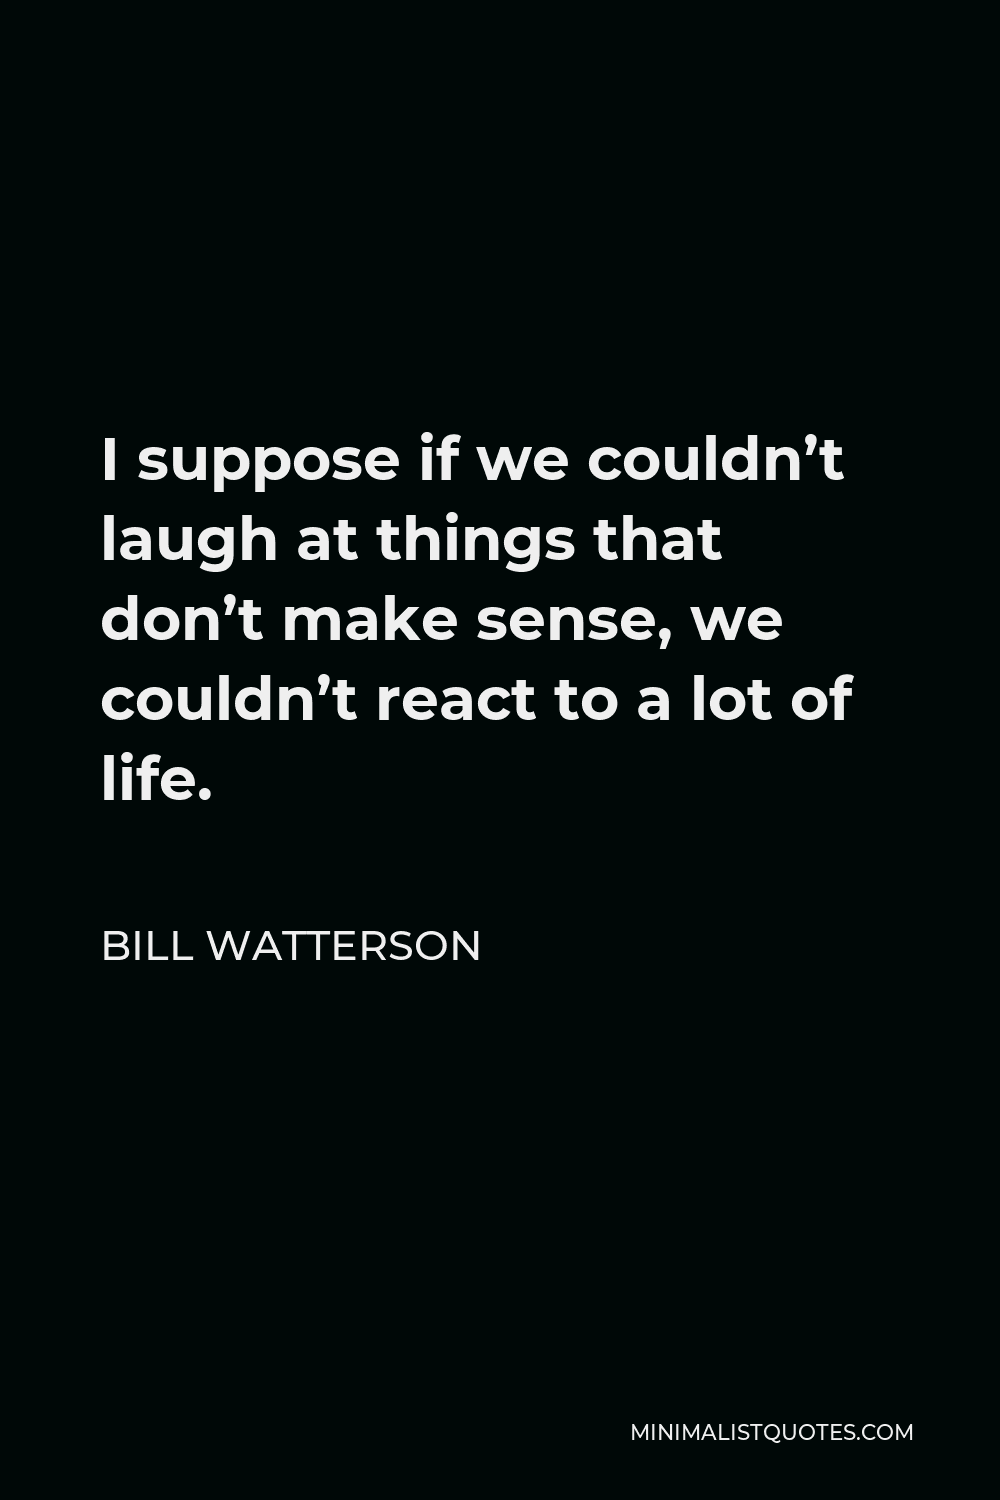 Bill Watterson Quote - I suppose if we couldn’t laugh at things that don’t make sense, we couldn’t react to a lot of life.